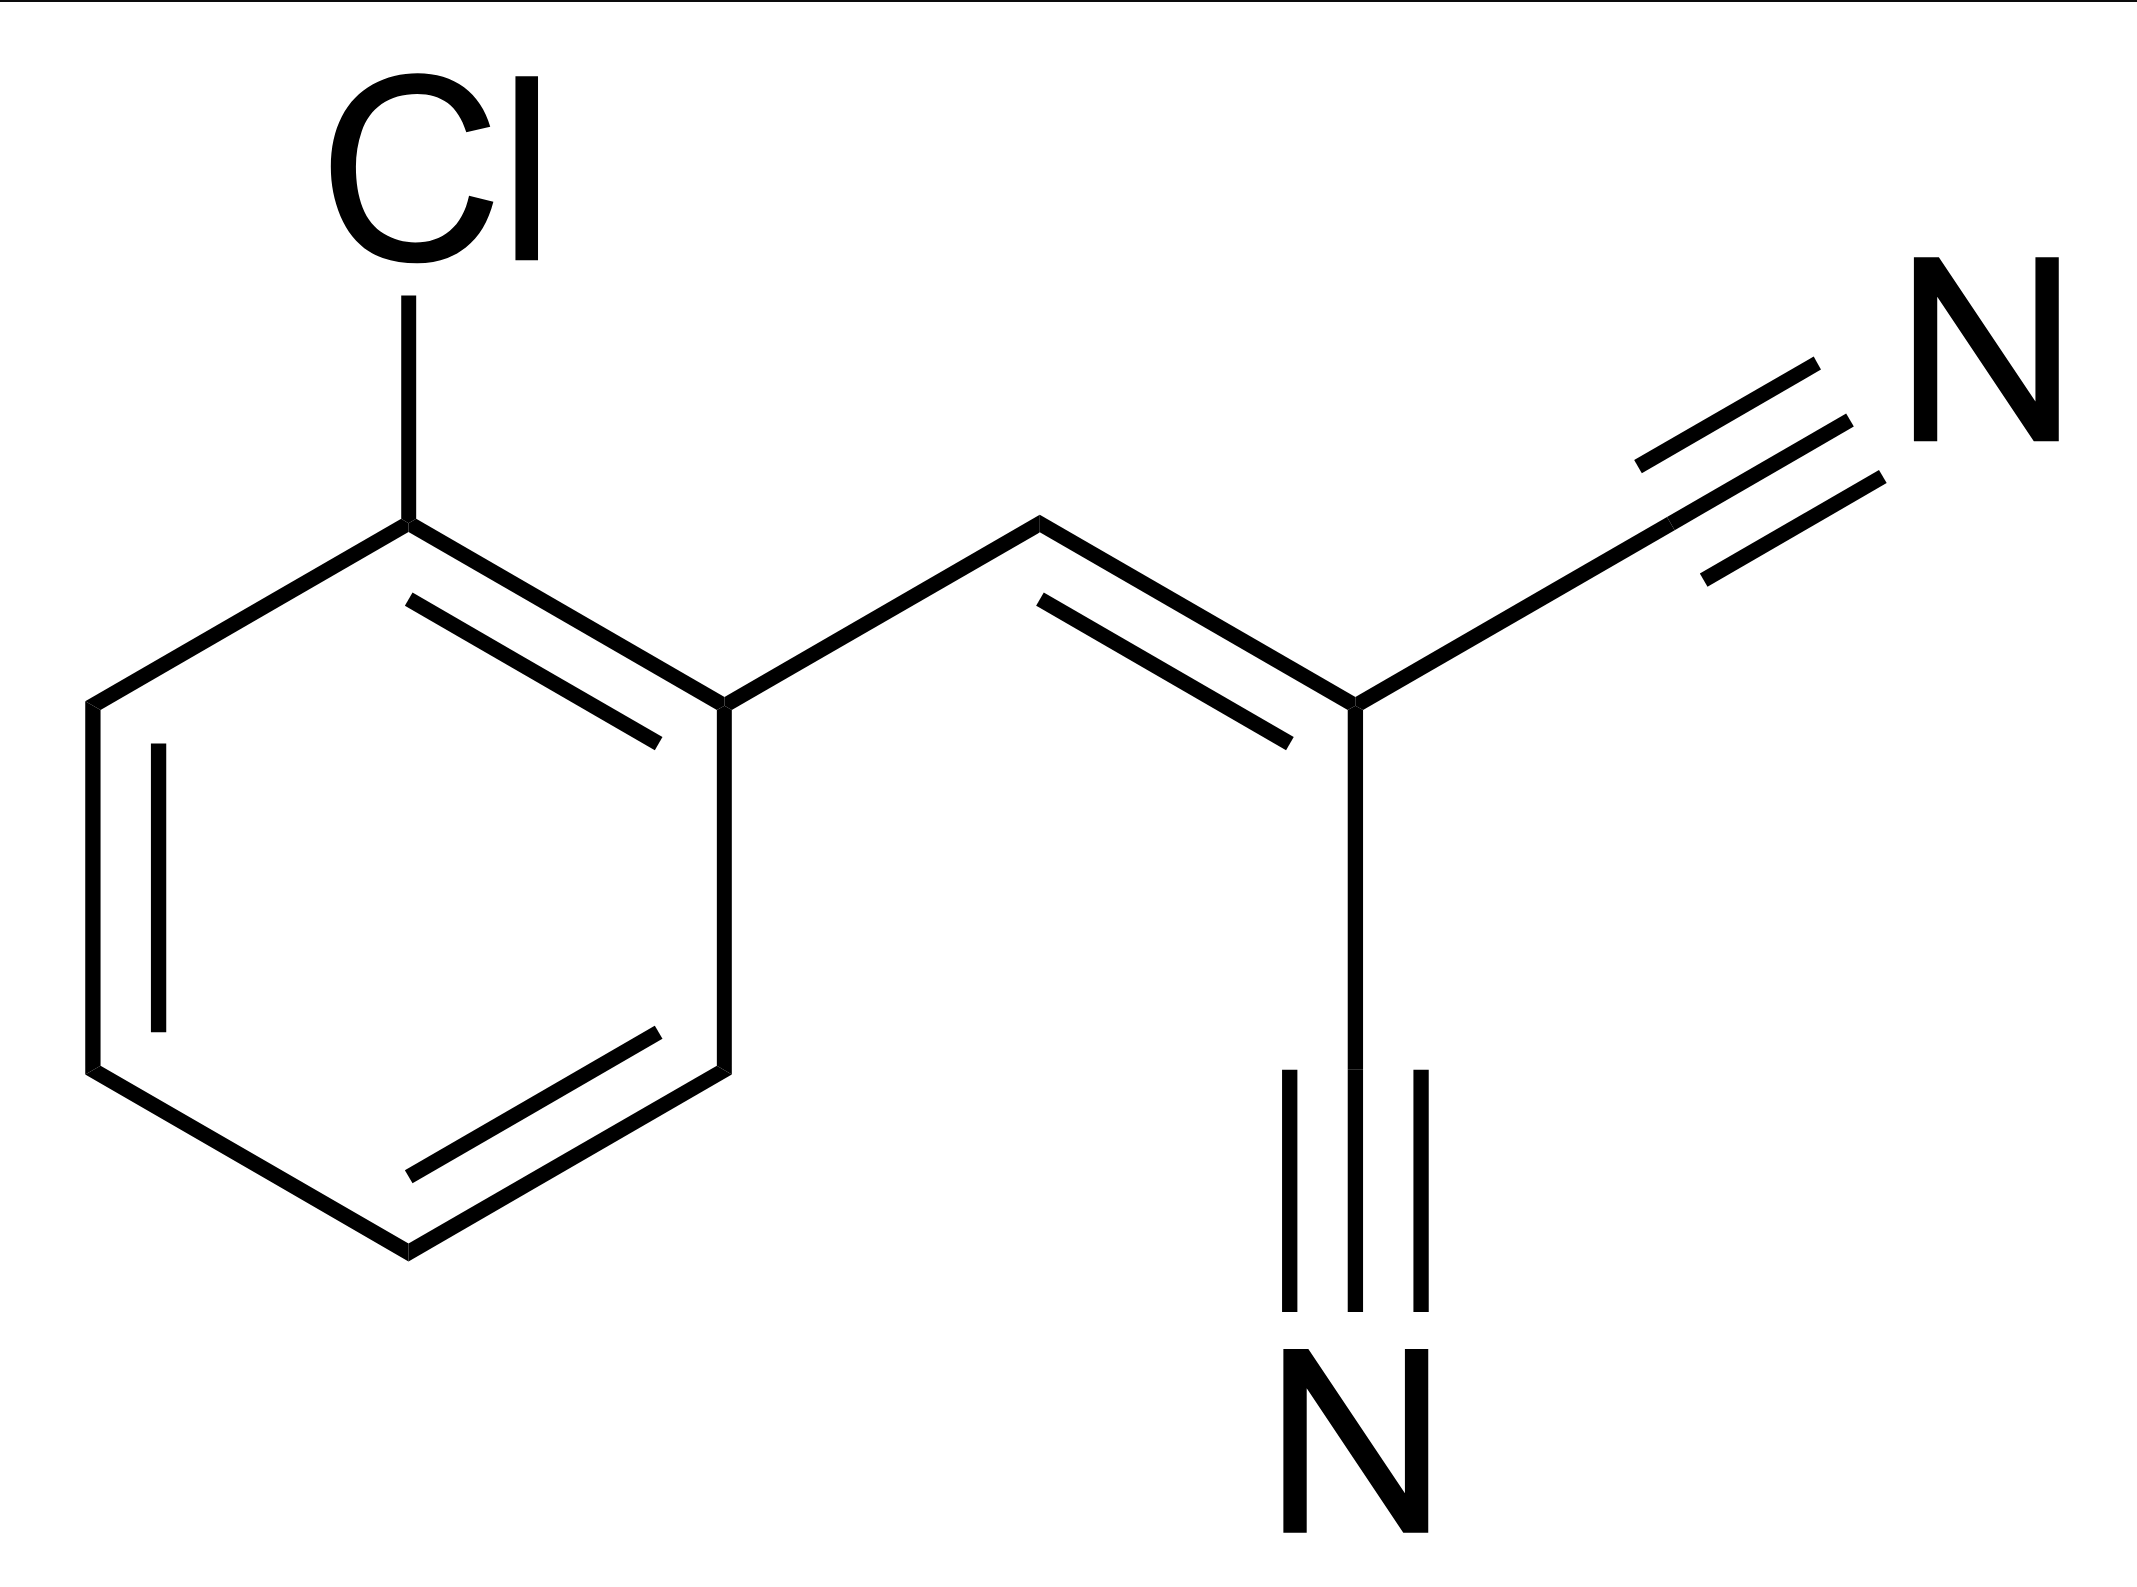 The chemical structure of tear gas irritant 2-chlorobenzalmalononitrile